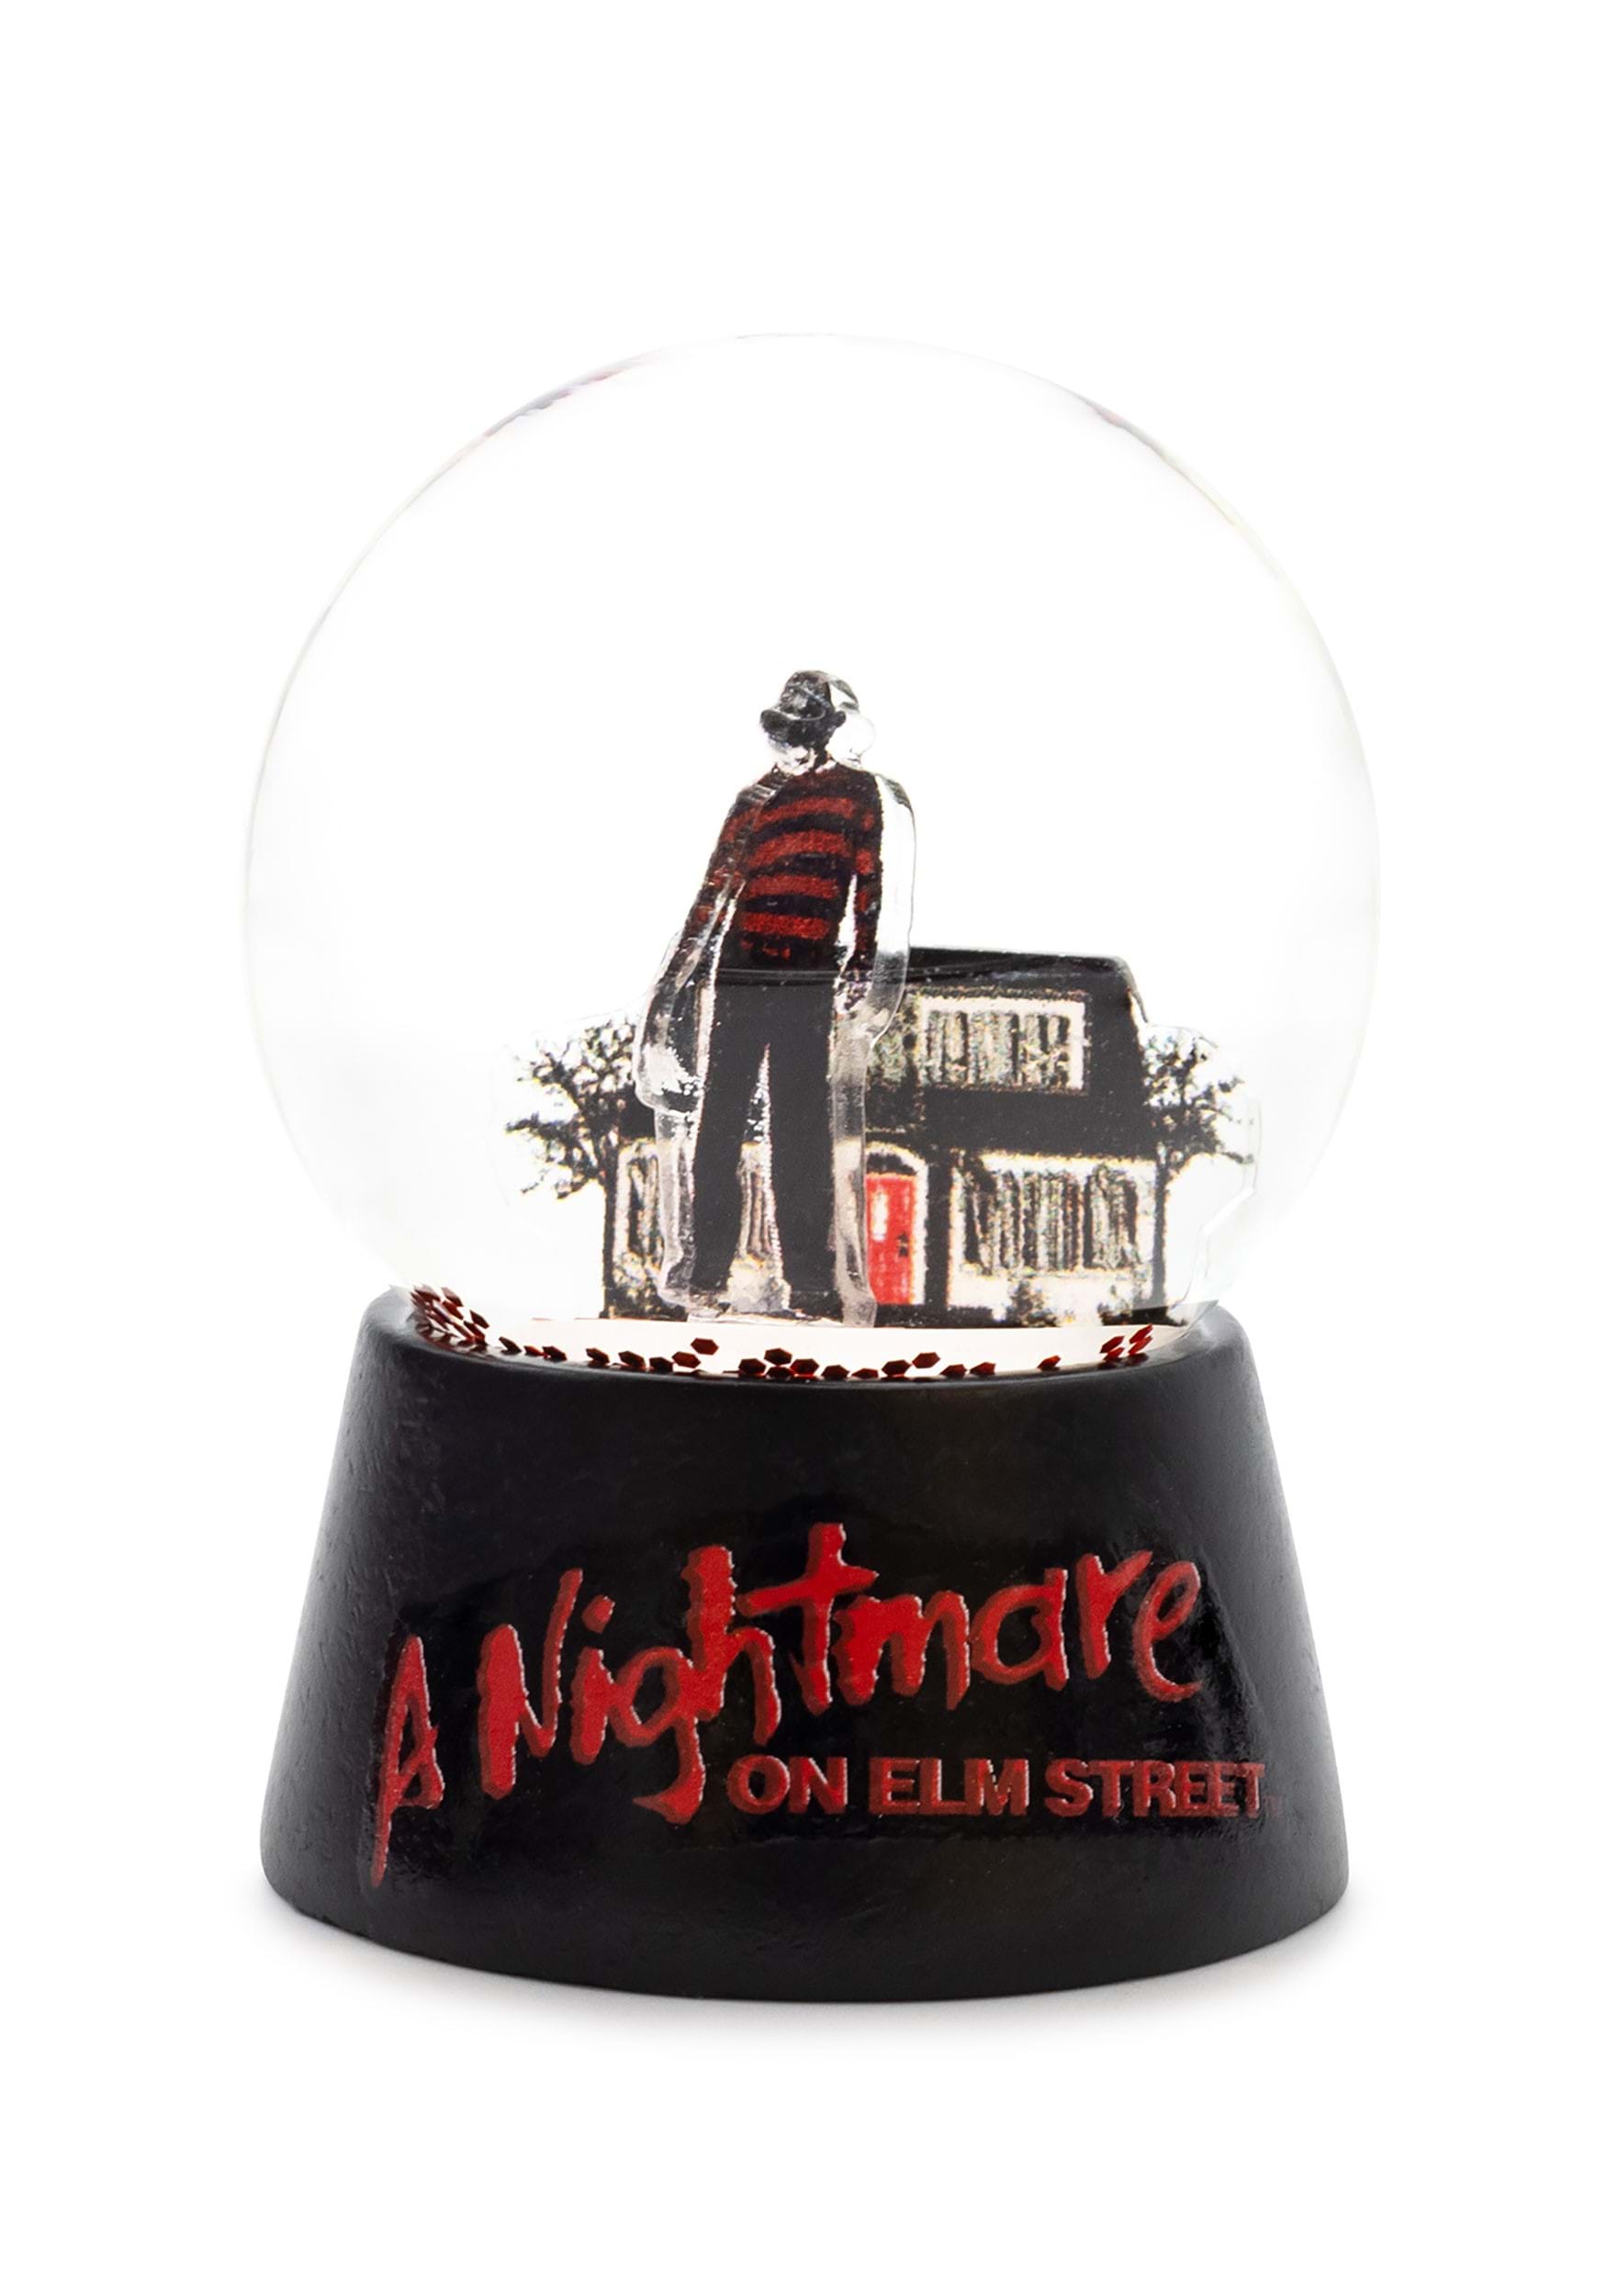 https://images.fun.com/products/91842/2-1-283731/wb-horror-mystery-mini-snow-globes-alt-7.jpg